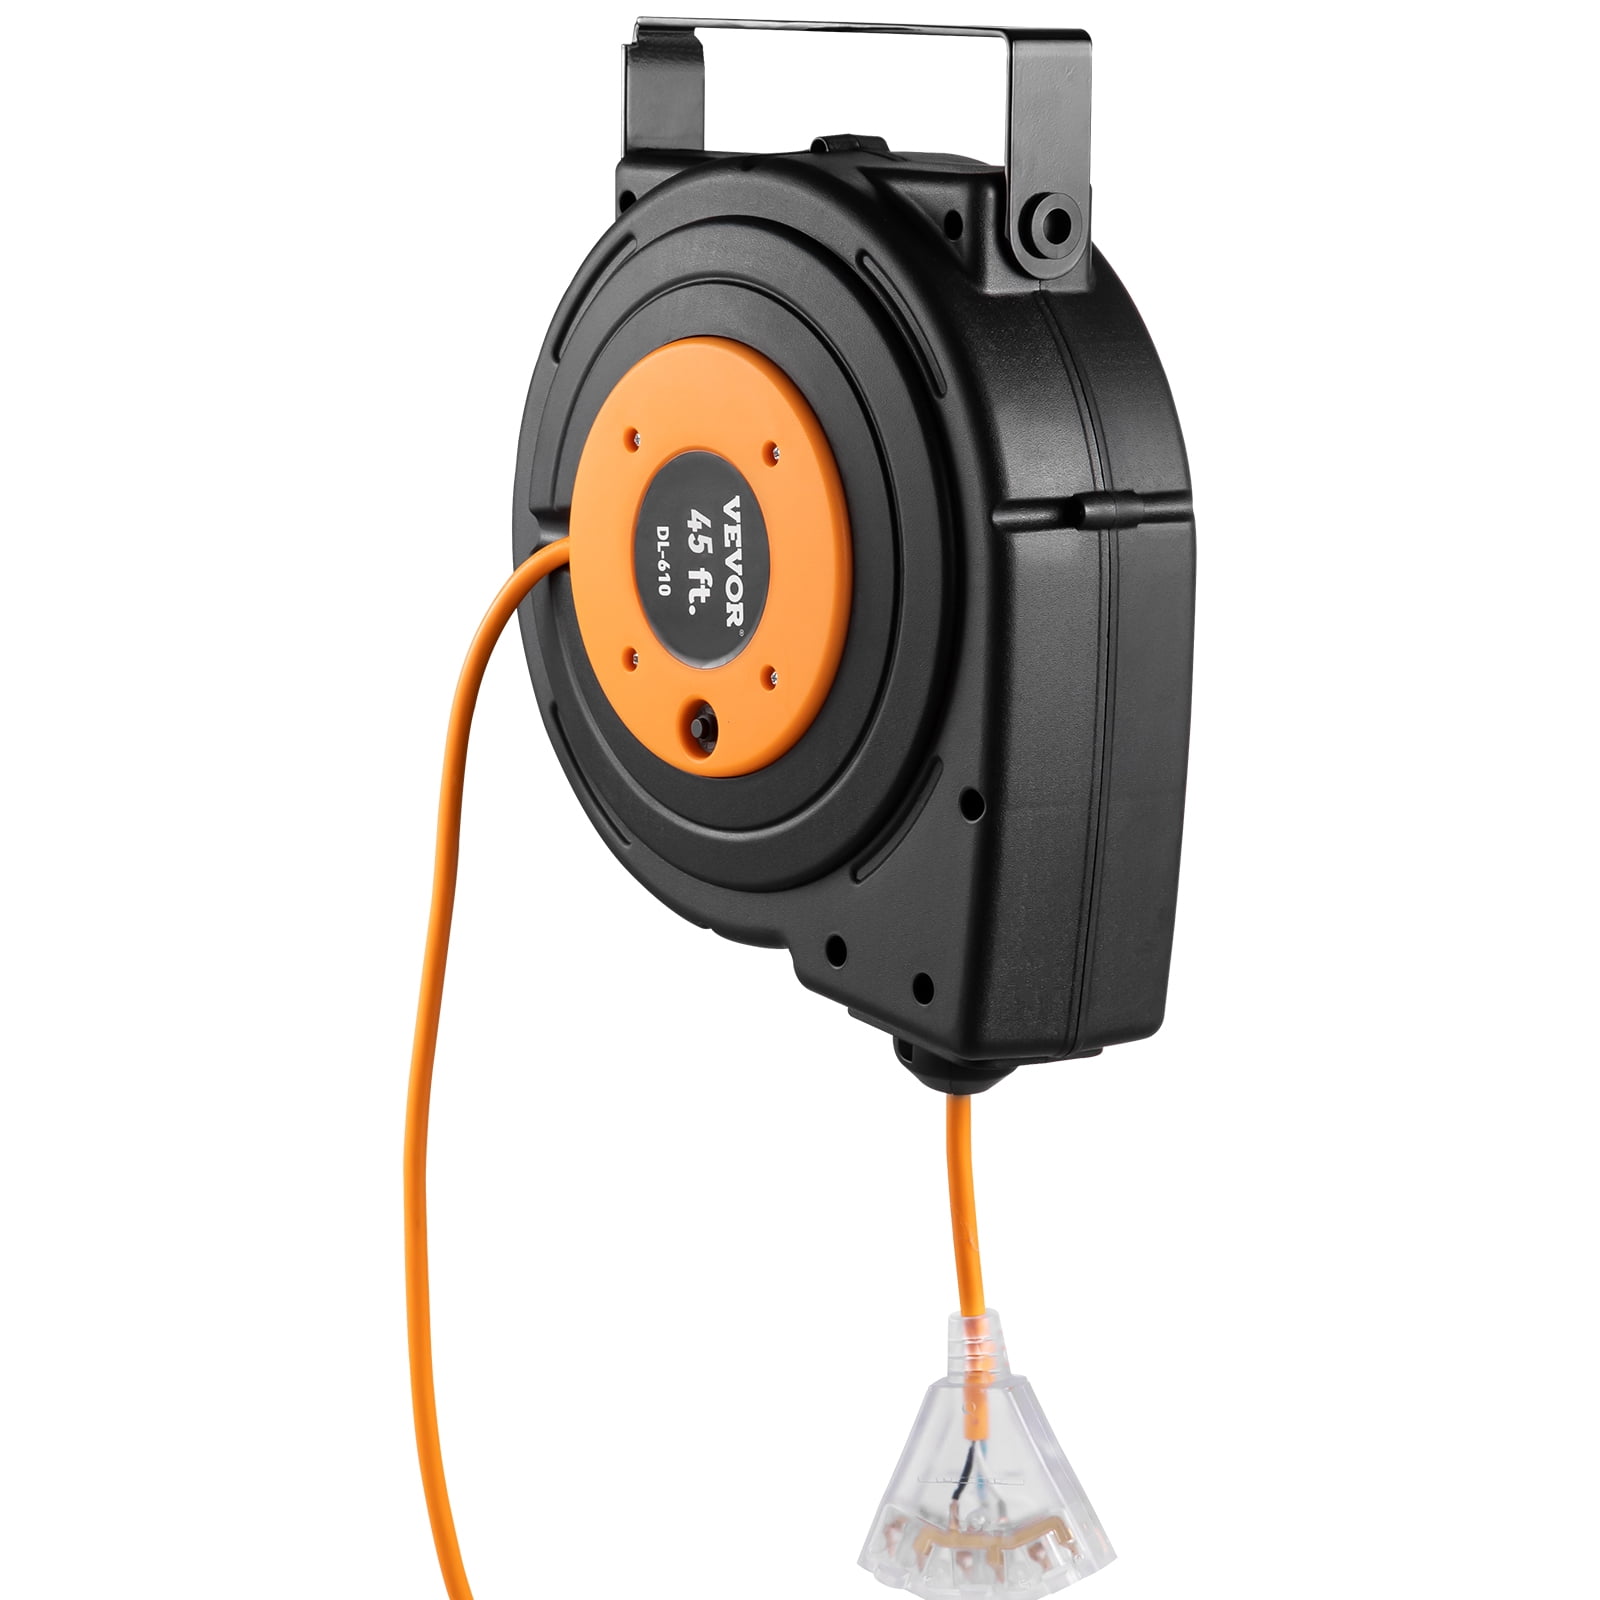 VEVOR Retractable Extension Cord Reel, 65 ft, Heavy Duty 12AWG/3C Sjtow Power Cord, with Lighted Triple Tap Outlet, 15 Amp Circuit Breaker, 180°